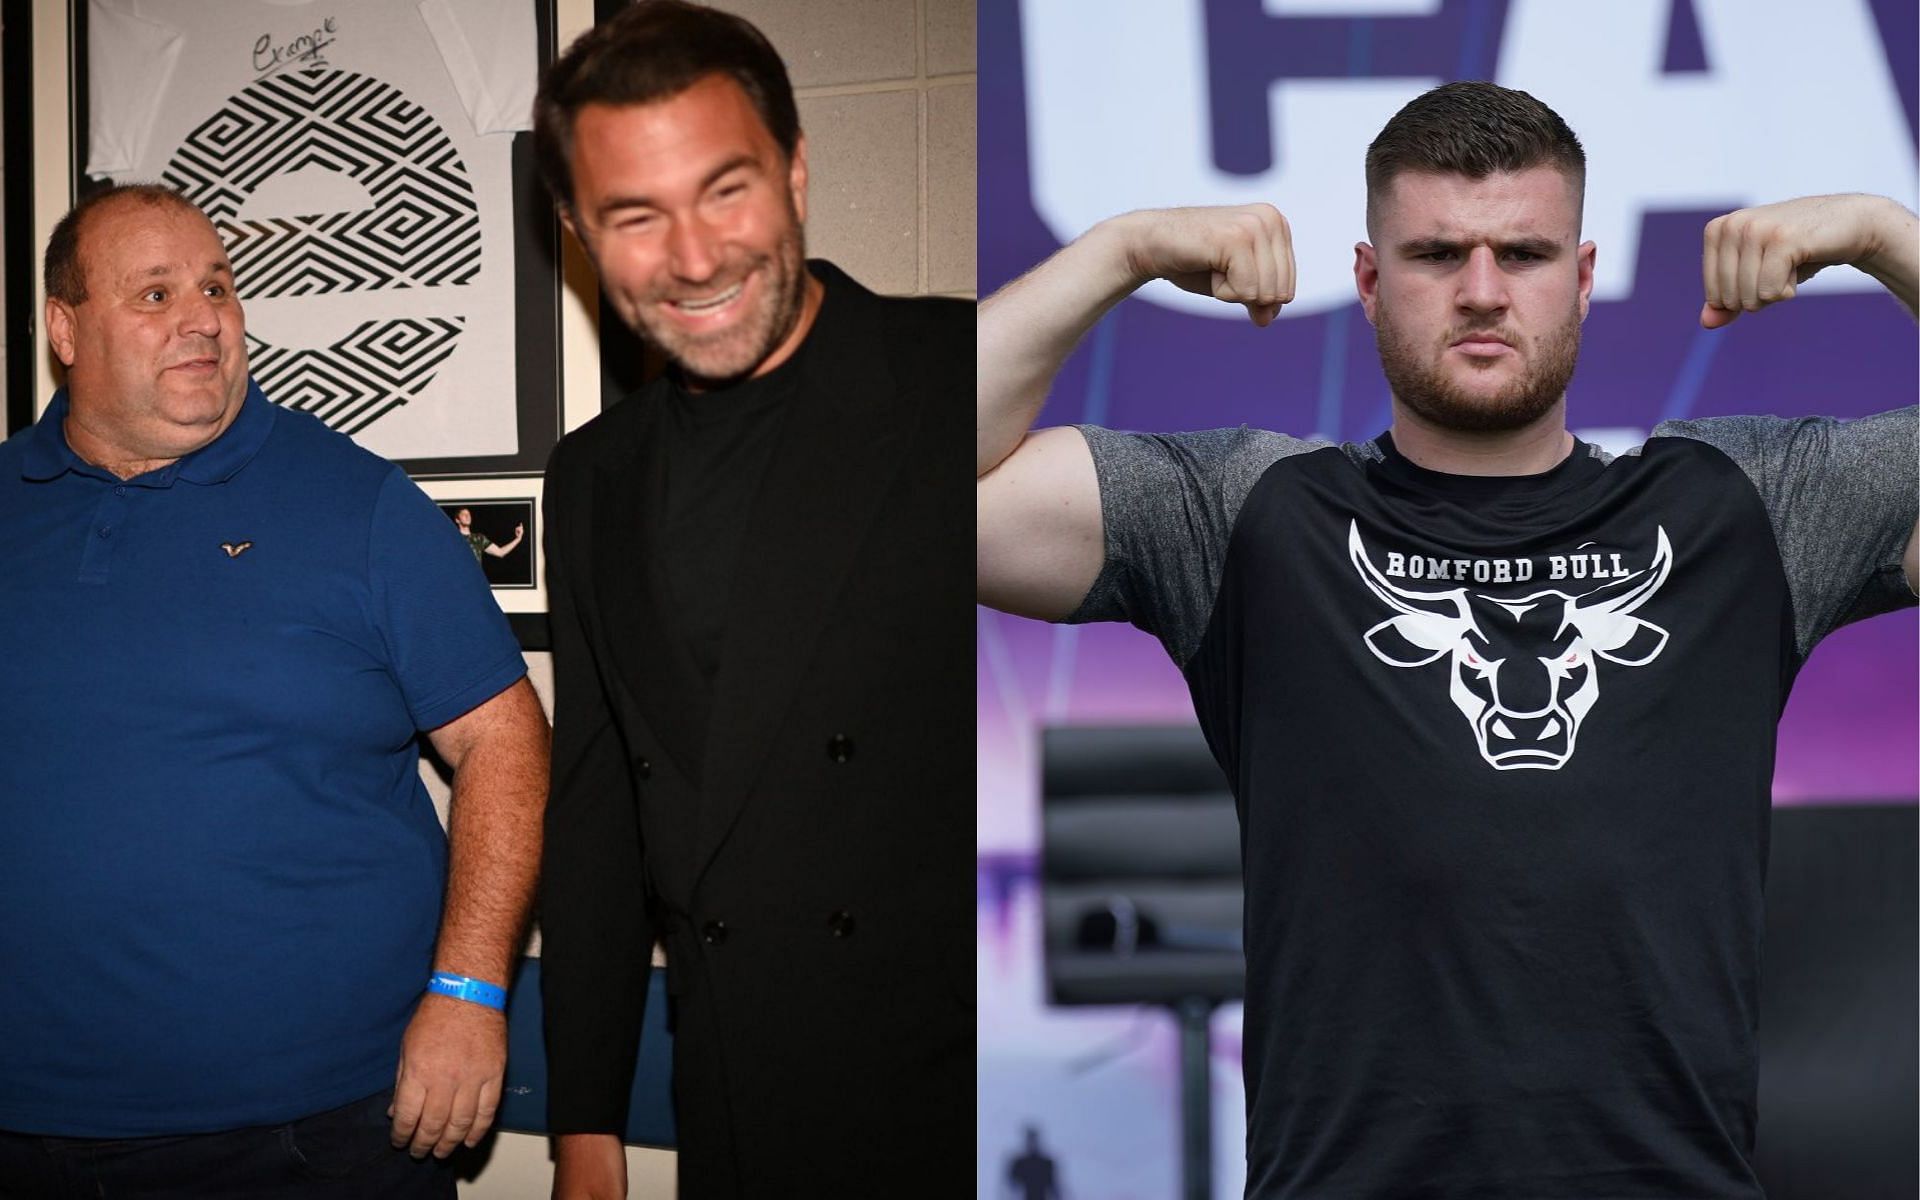 Eddie Hearn with Big John Fisher (left) and Johnny Fisher (right)